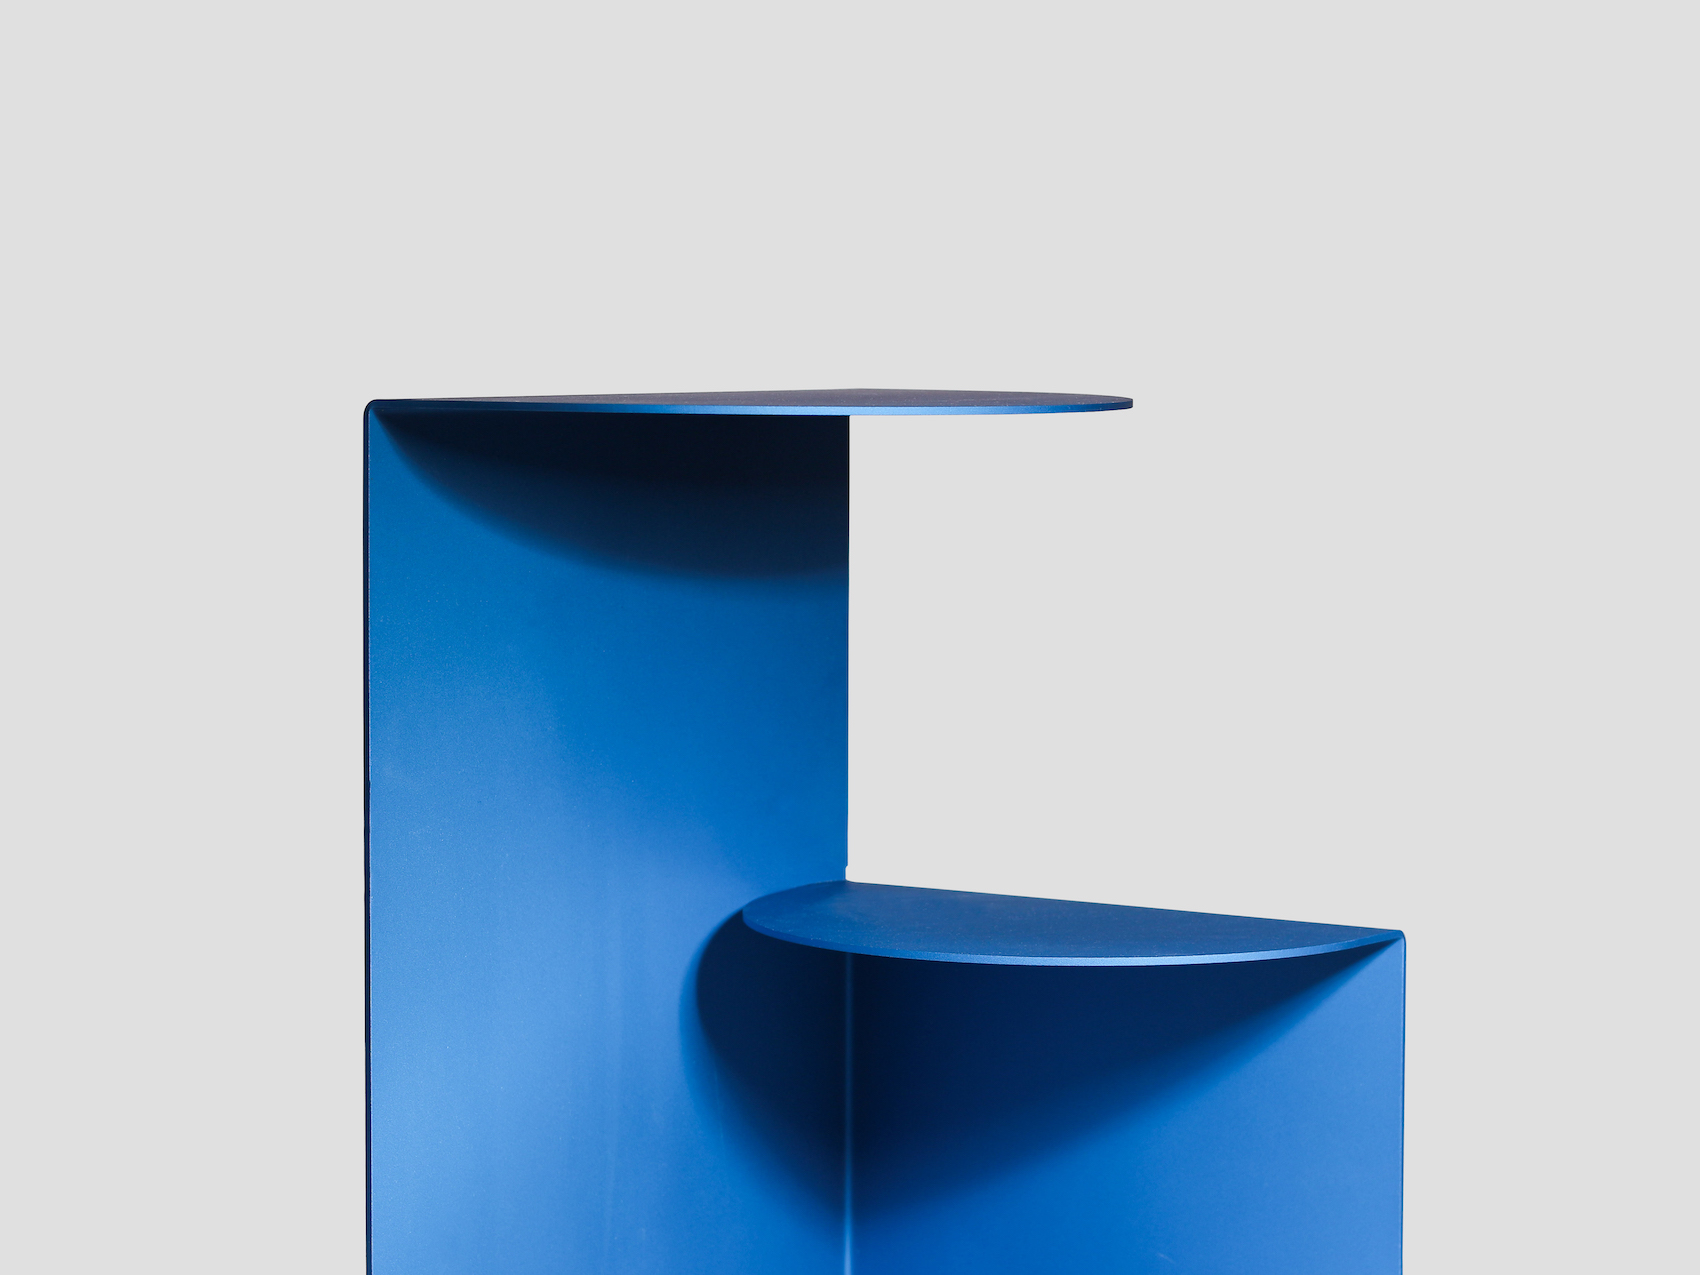 Minimalist Side Table "Slope" by Hayo Gebauer